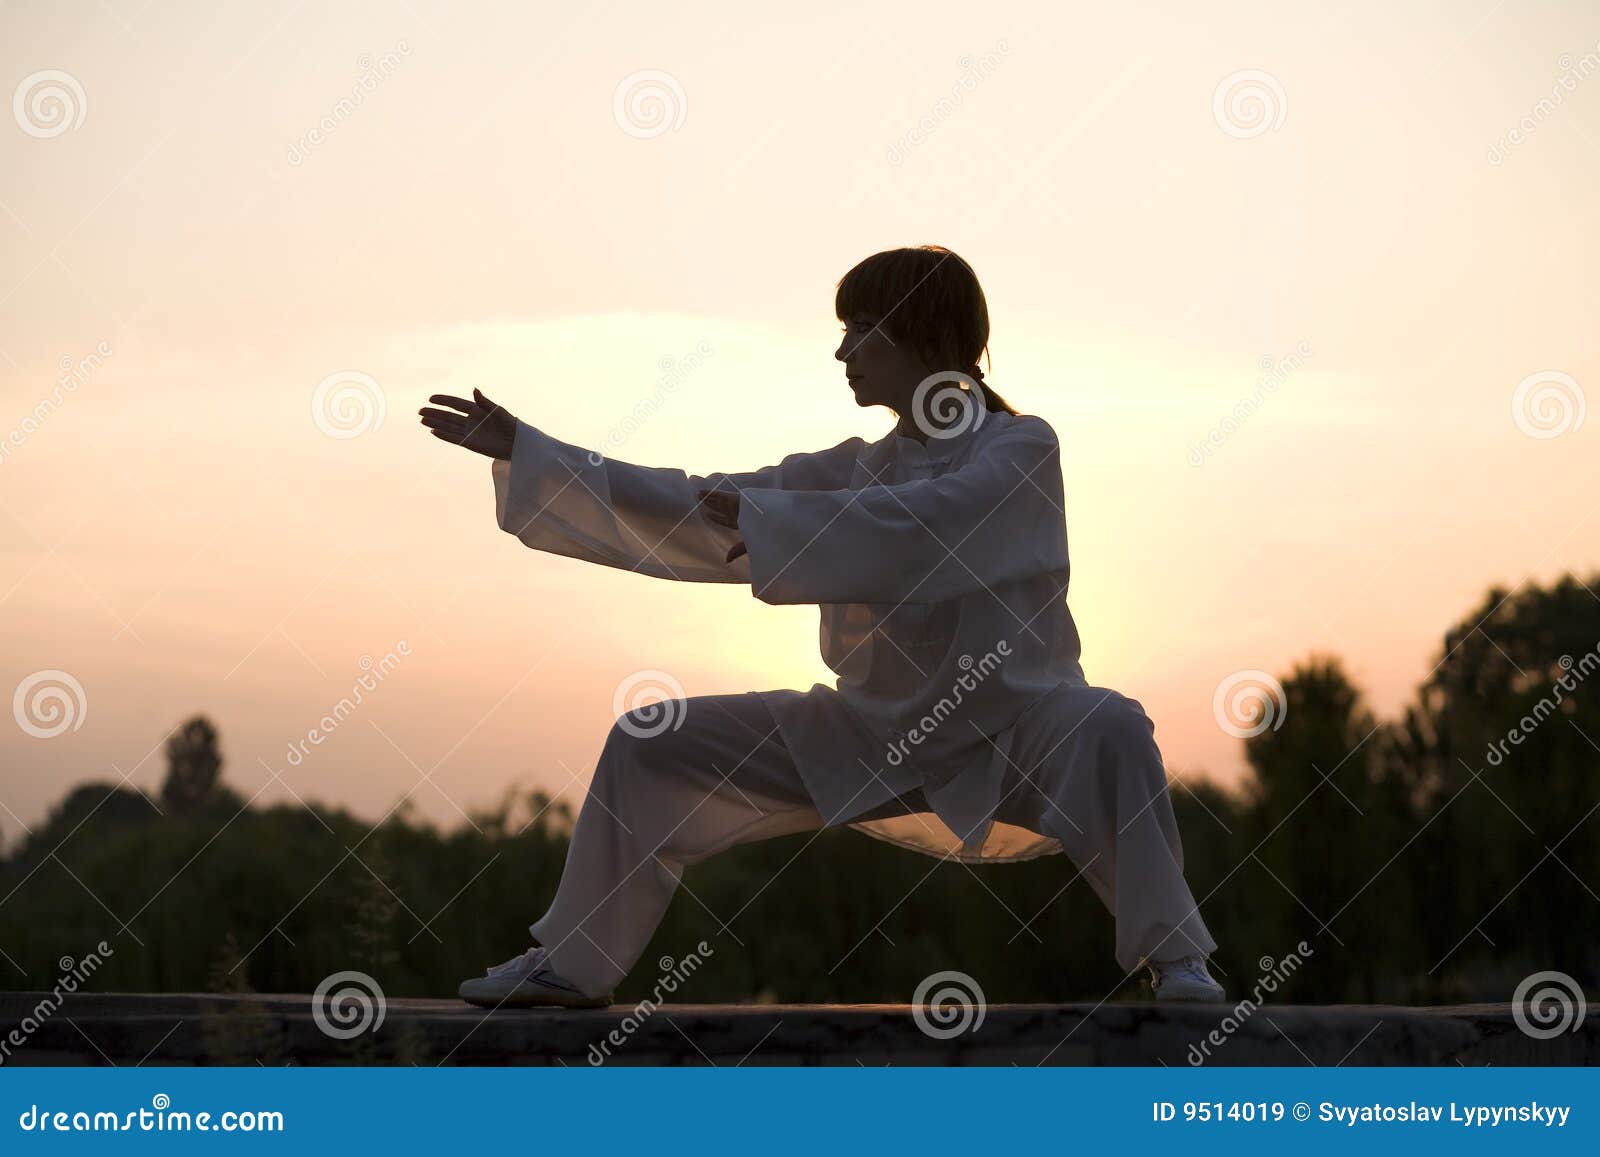 Woman in White Suit Make S Taiji Chuan Exercise Stock Image - Image of ...